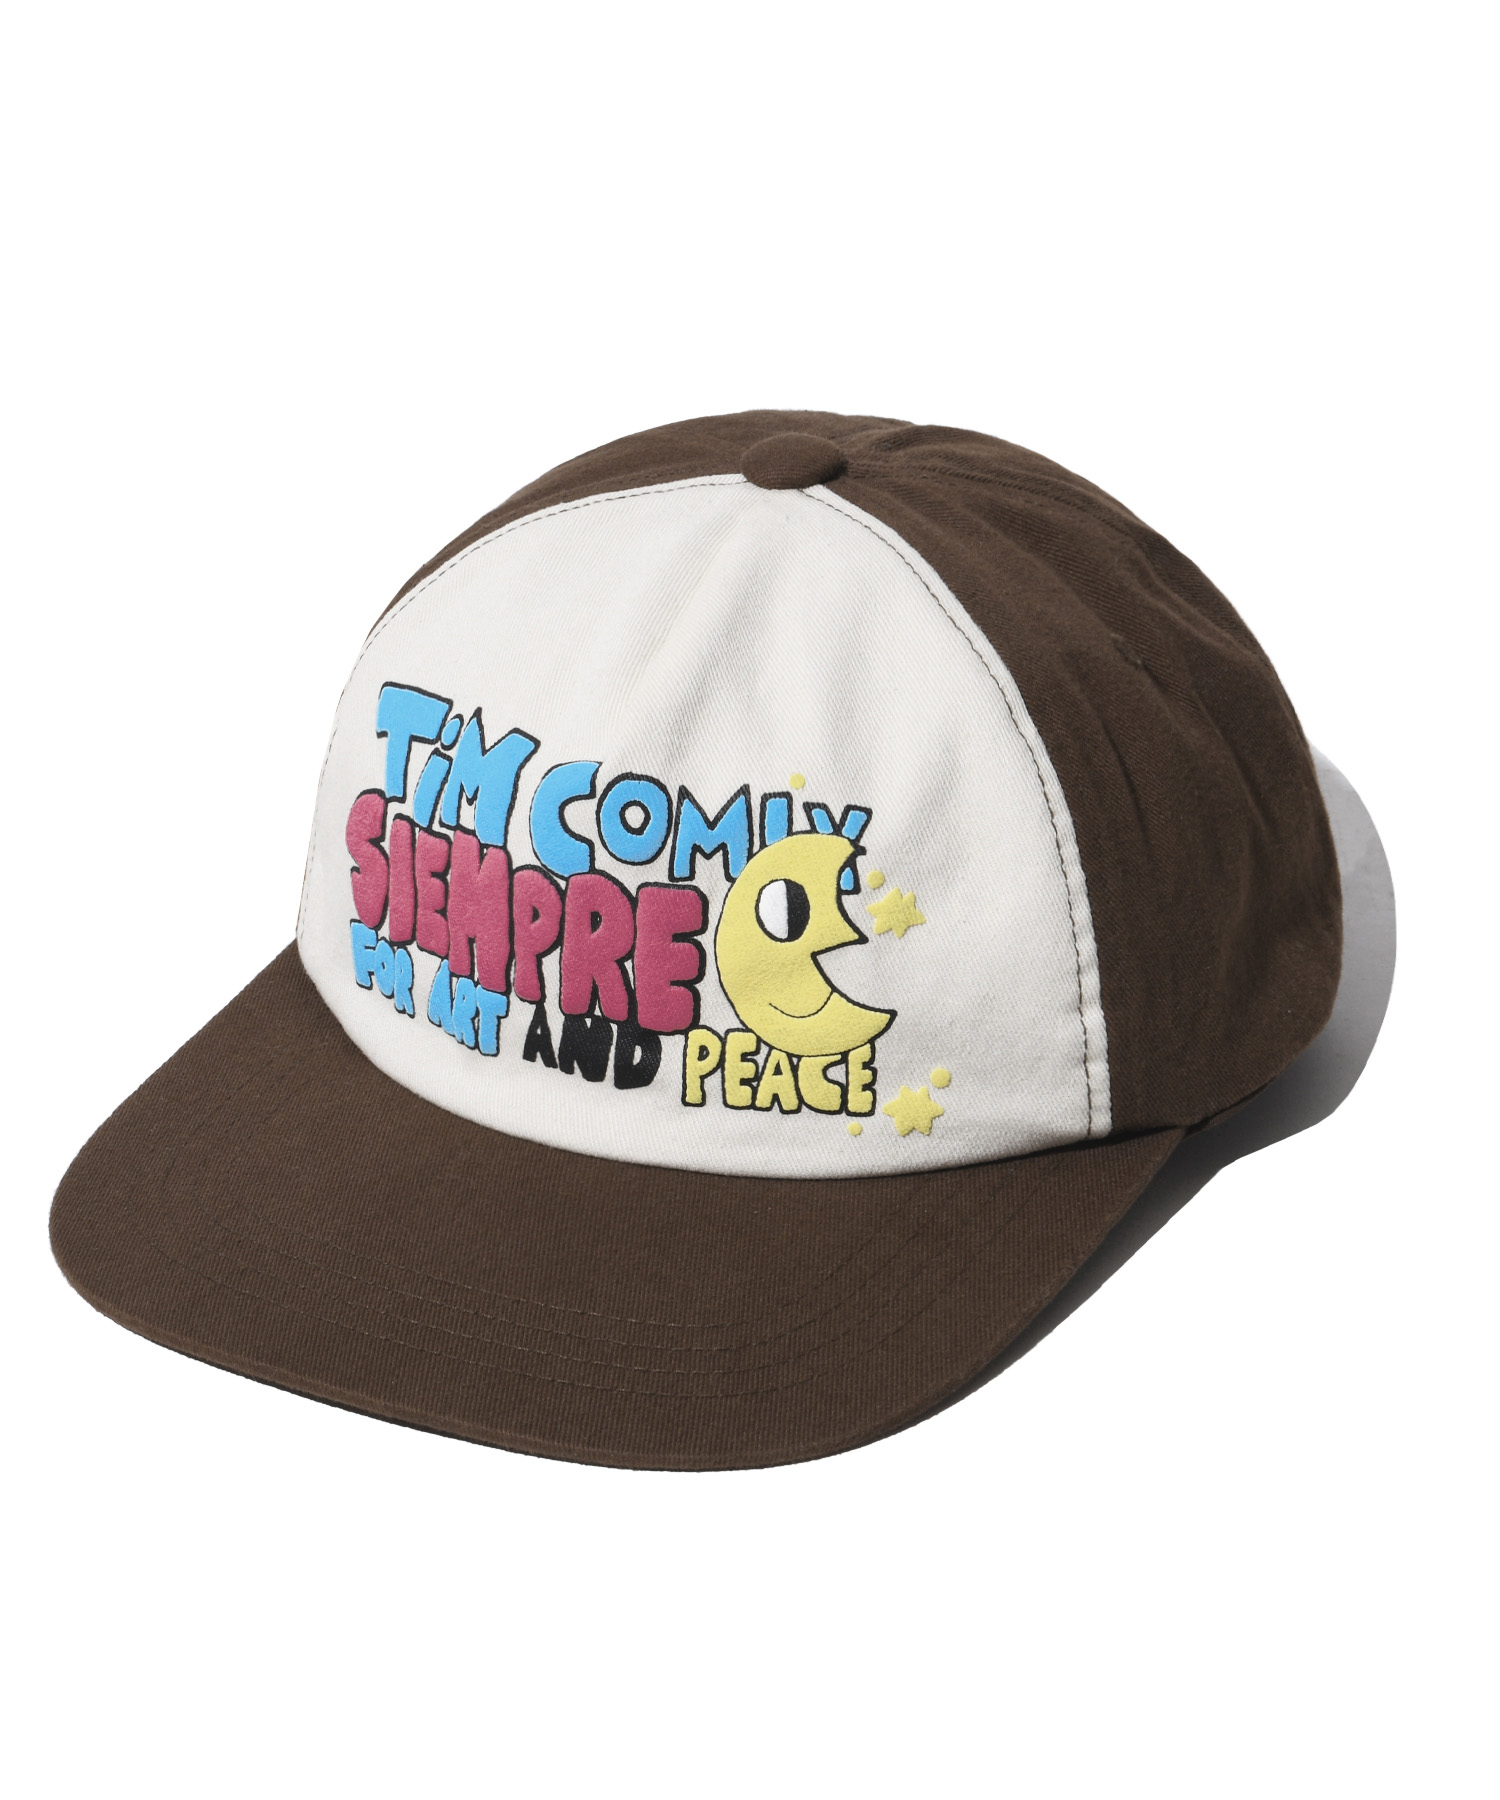 TIM SIEMPRE MOON FOR ART AND PEACE TRUCKER CAP BROWN